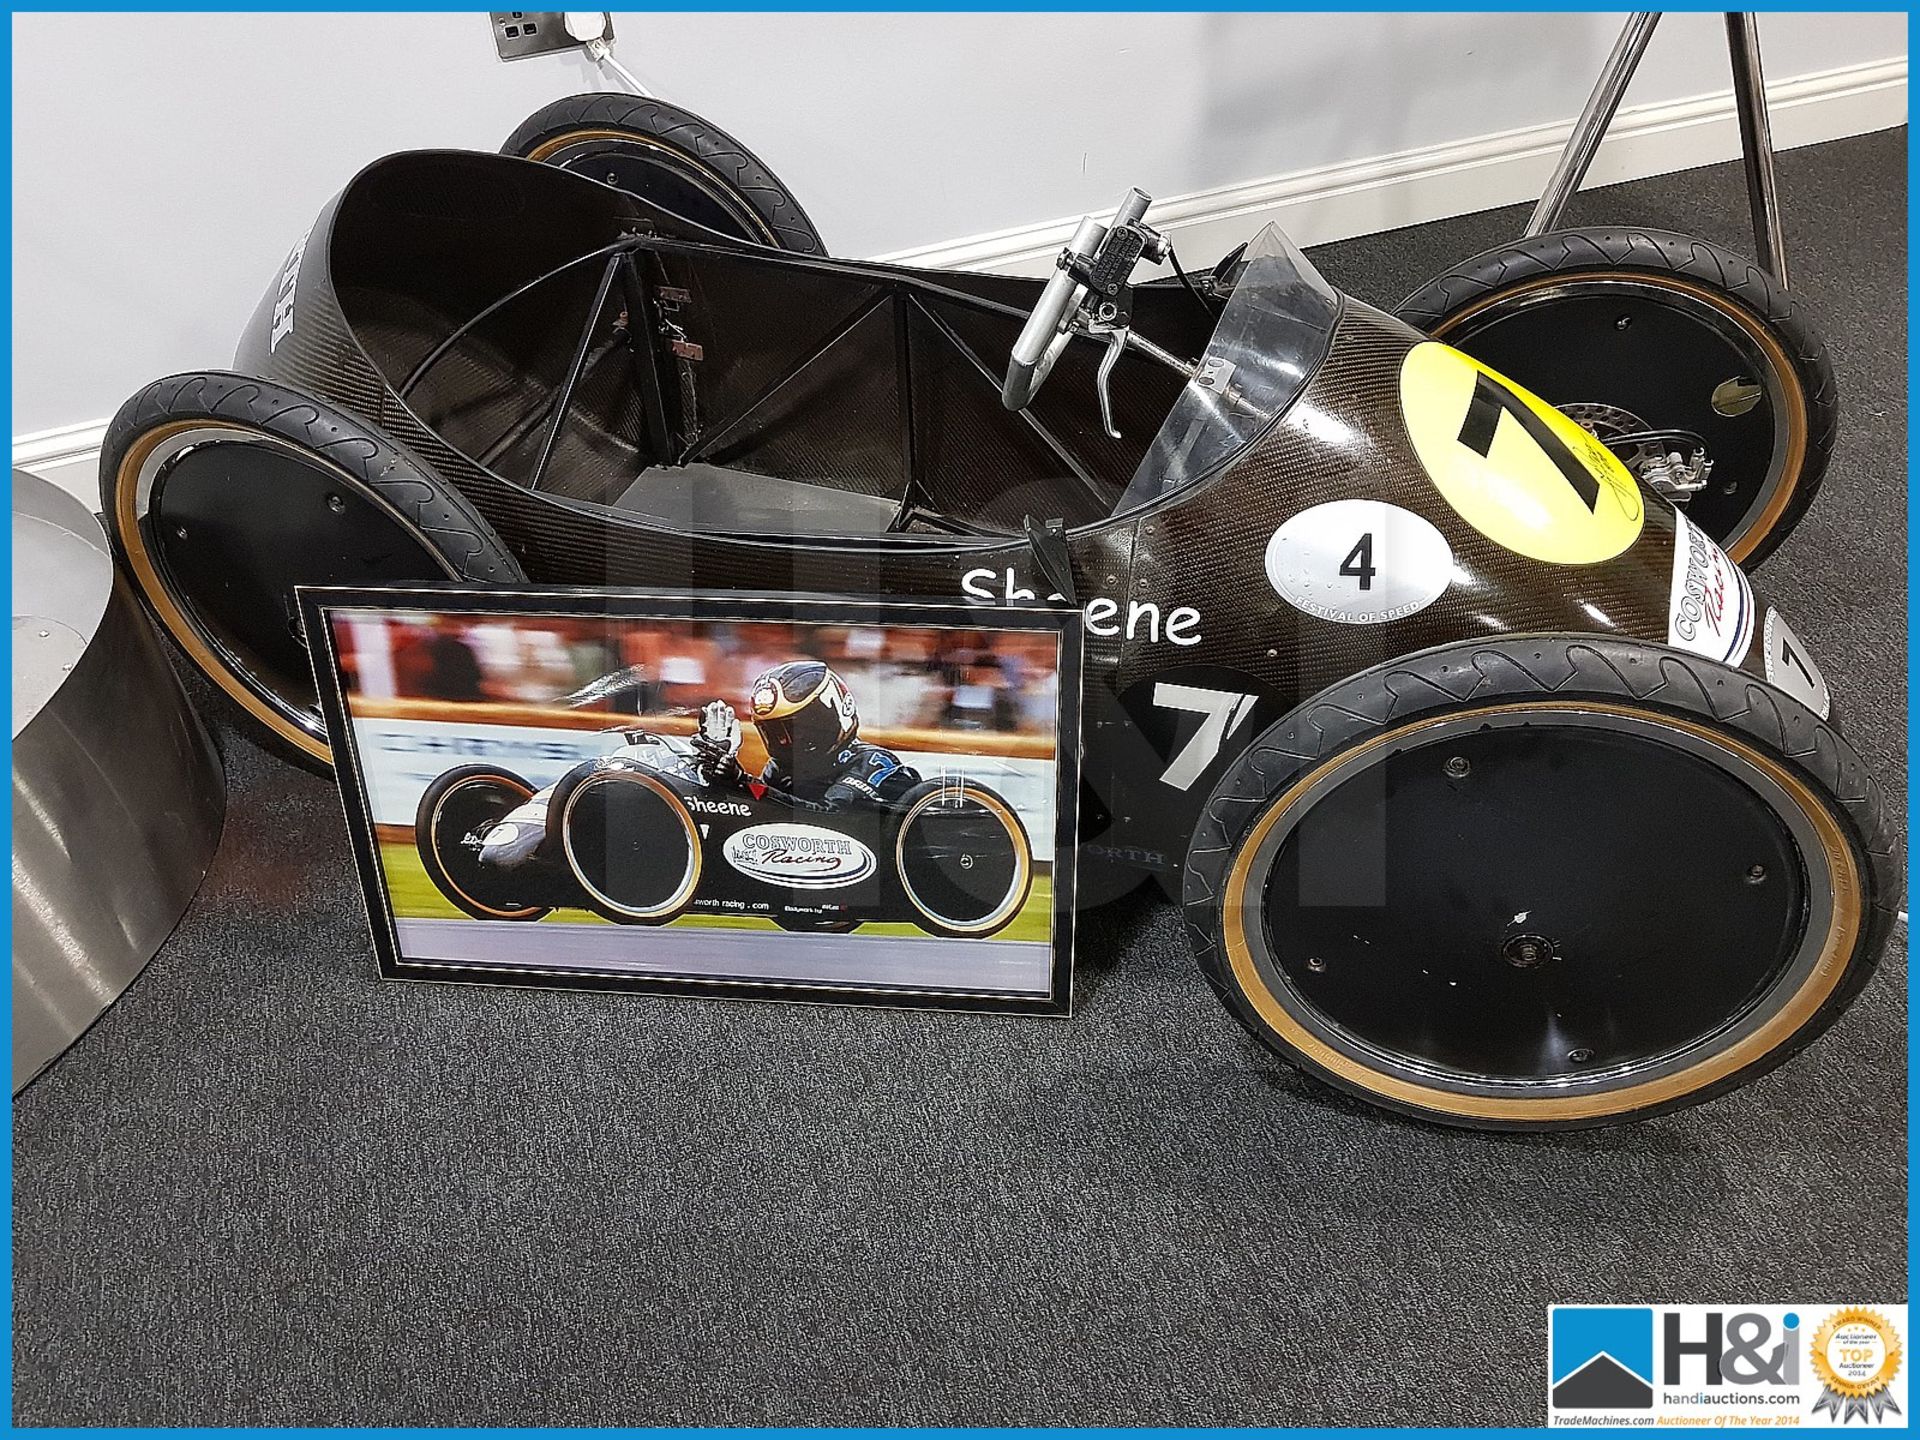 Barry Sheene carbon fibre racer. The down hill racer was designed and built by a team from Cosworth - Image 8 of 9